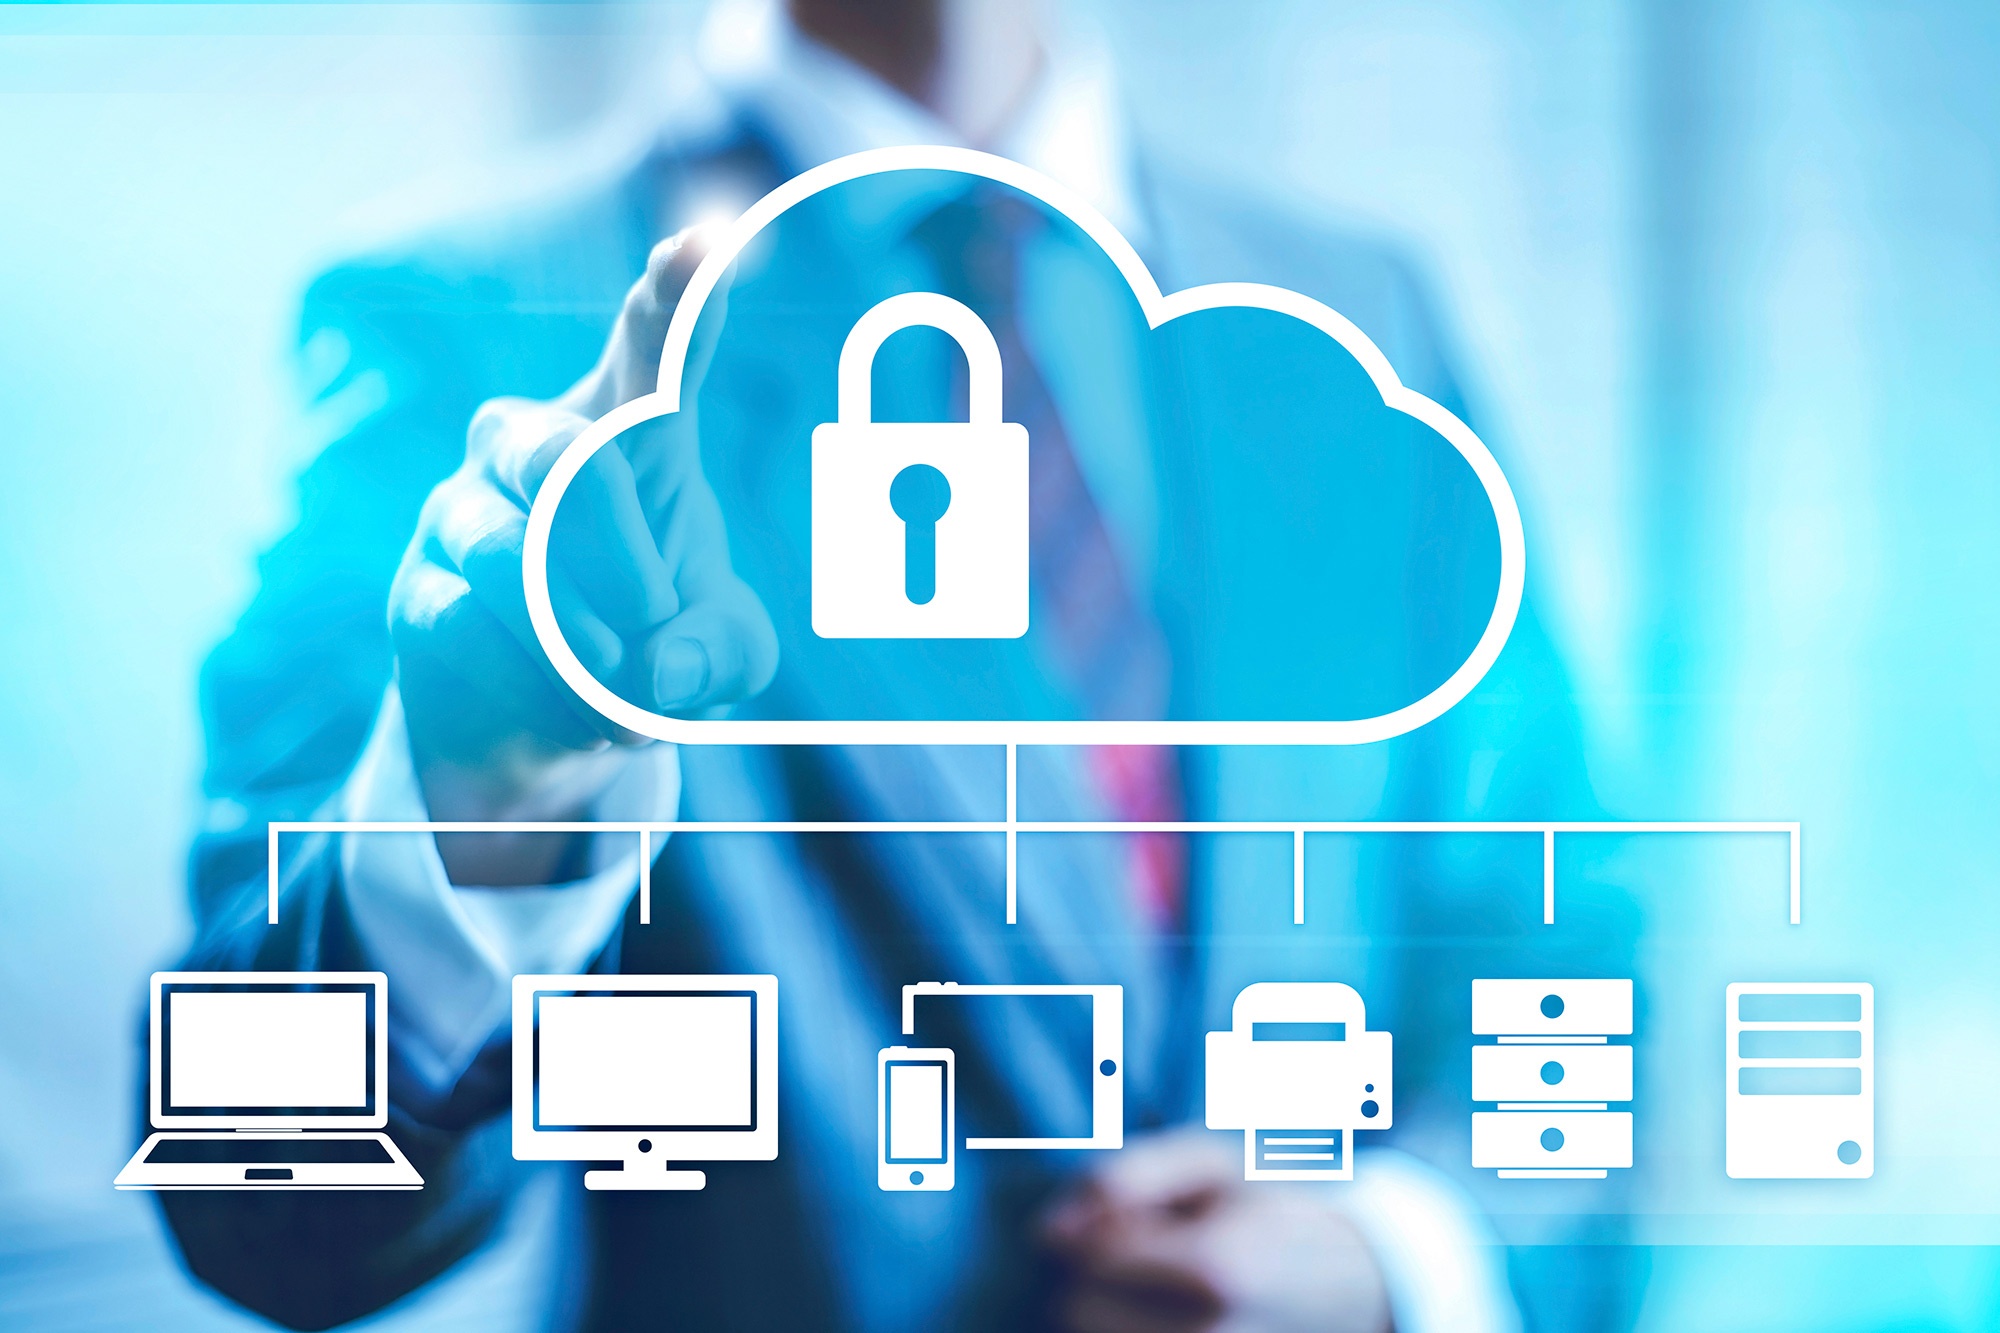 Fearing Cloud and IoT Leads to Privacy Concerns